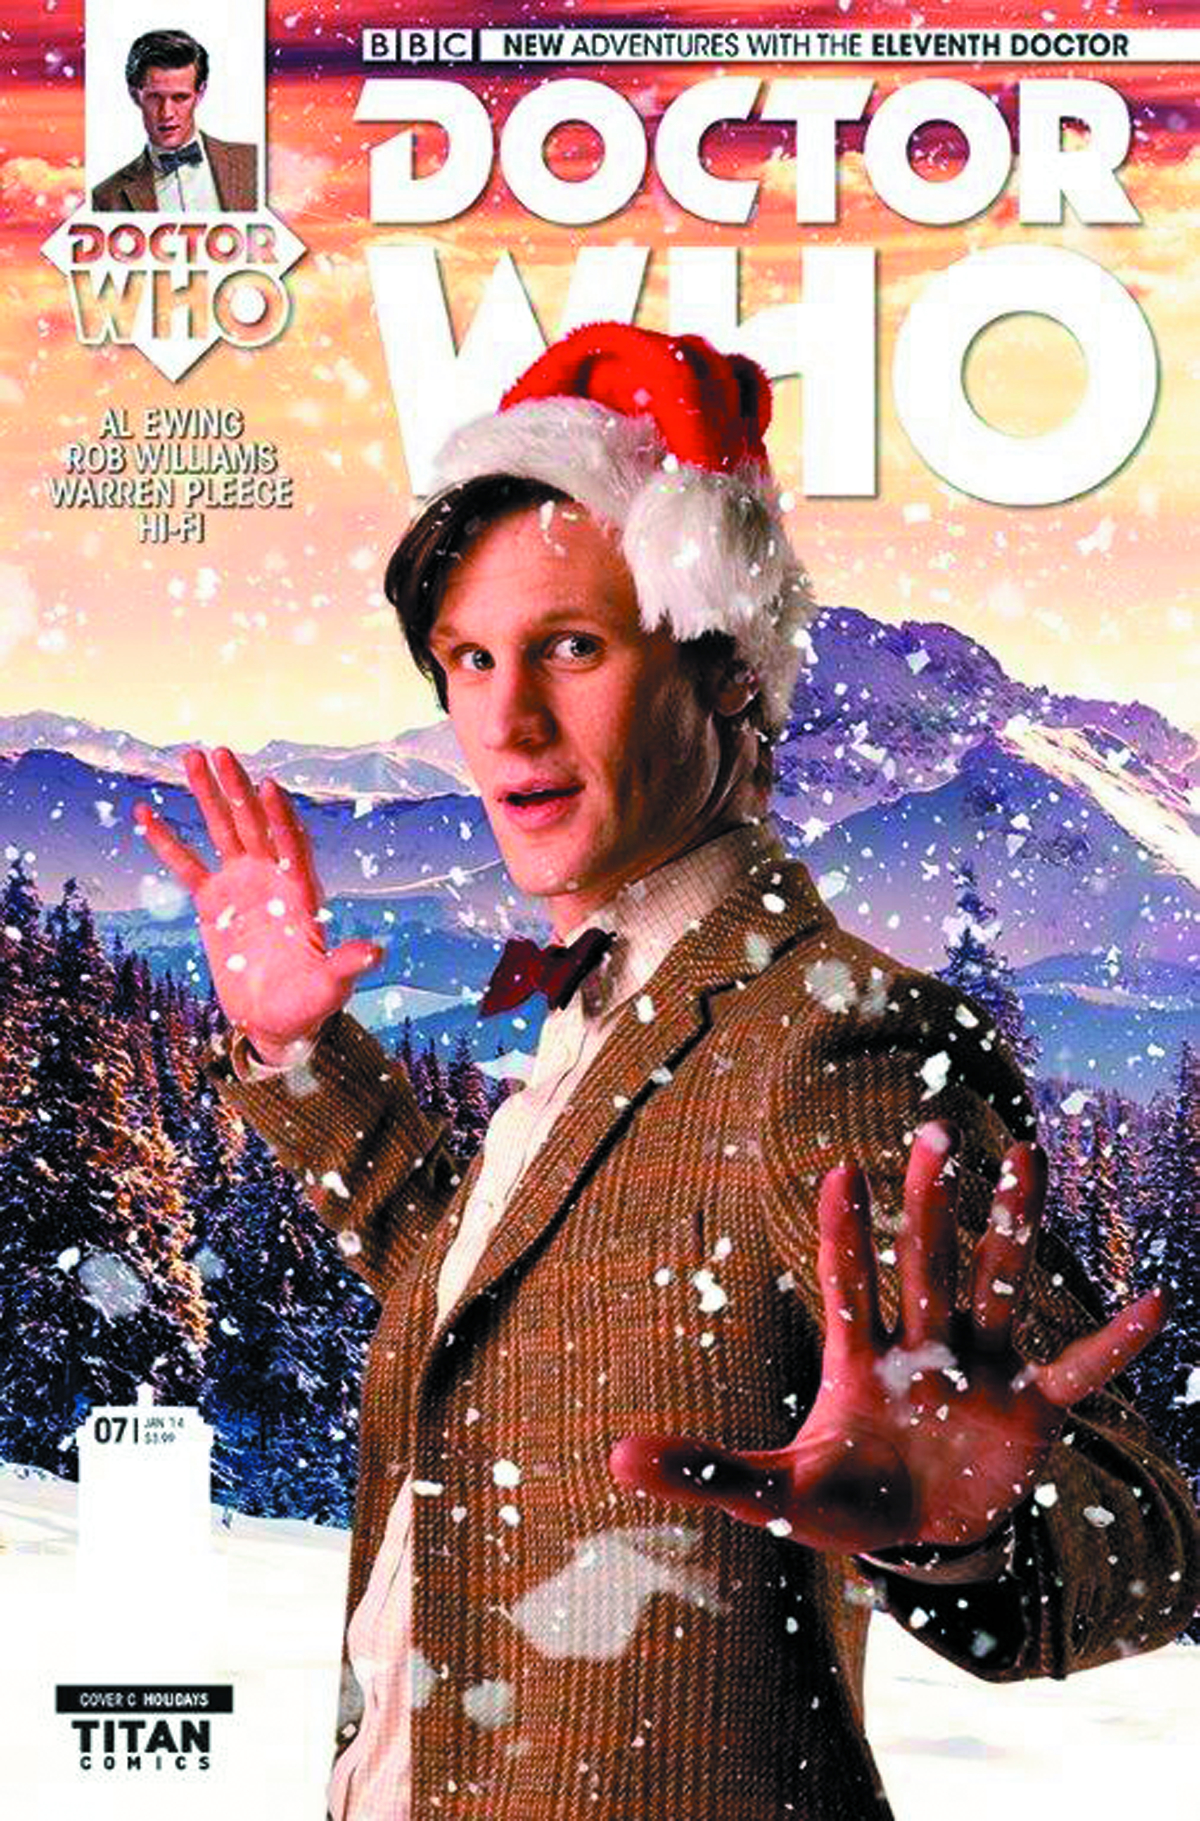 DOCTOR WHO 11TH #7 HOLIDAYS PHOTO